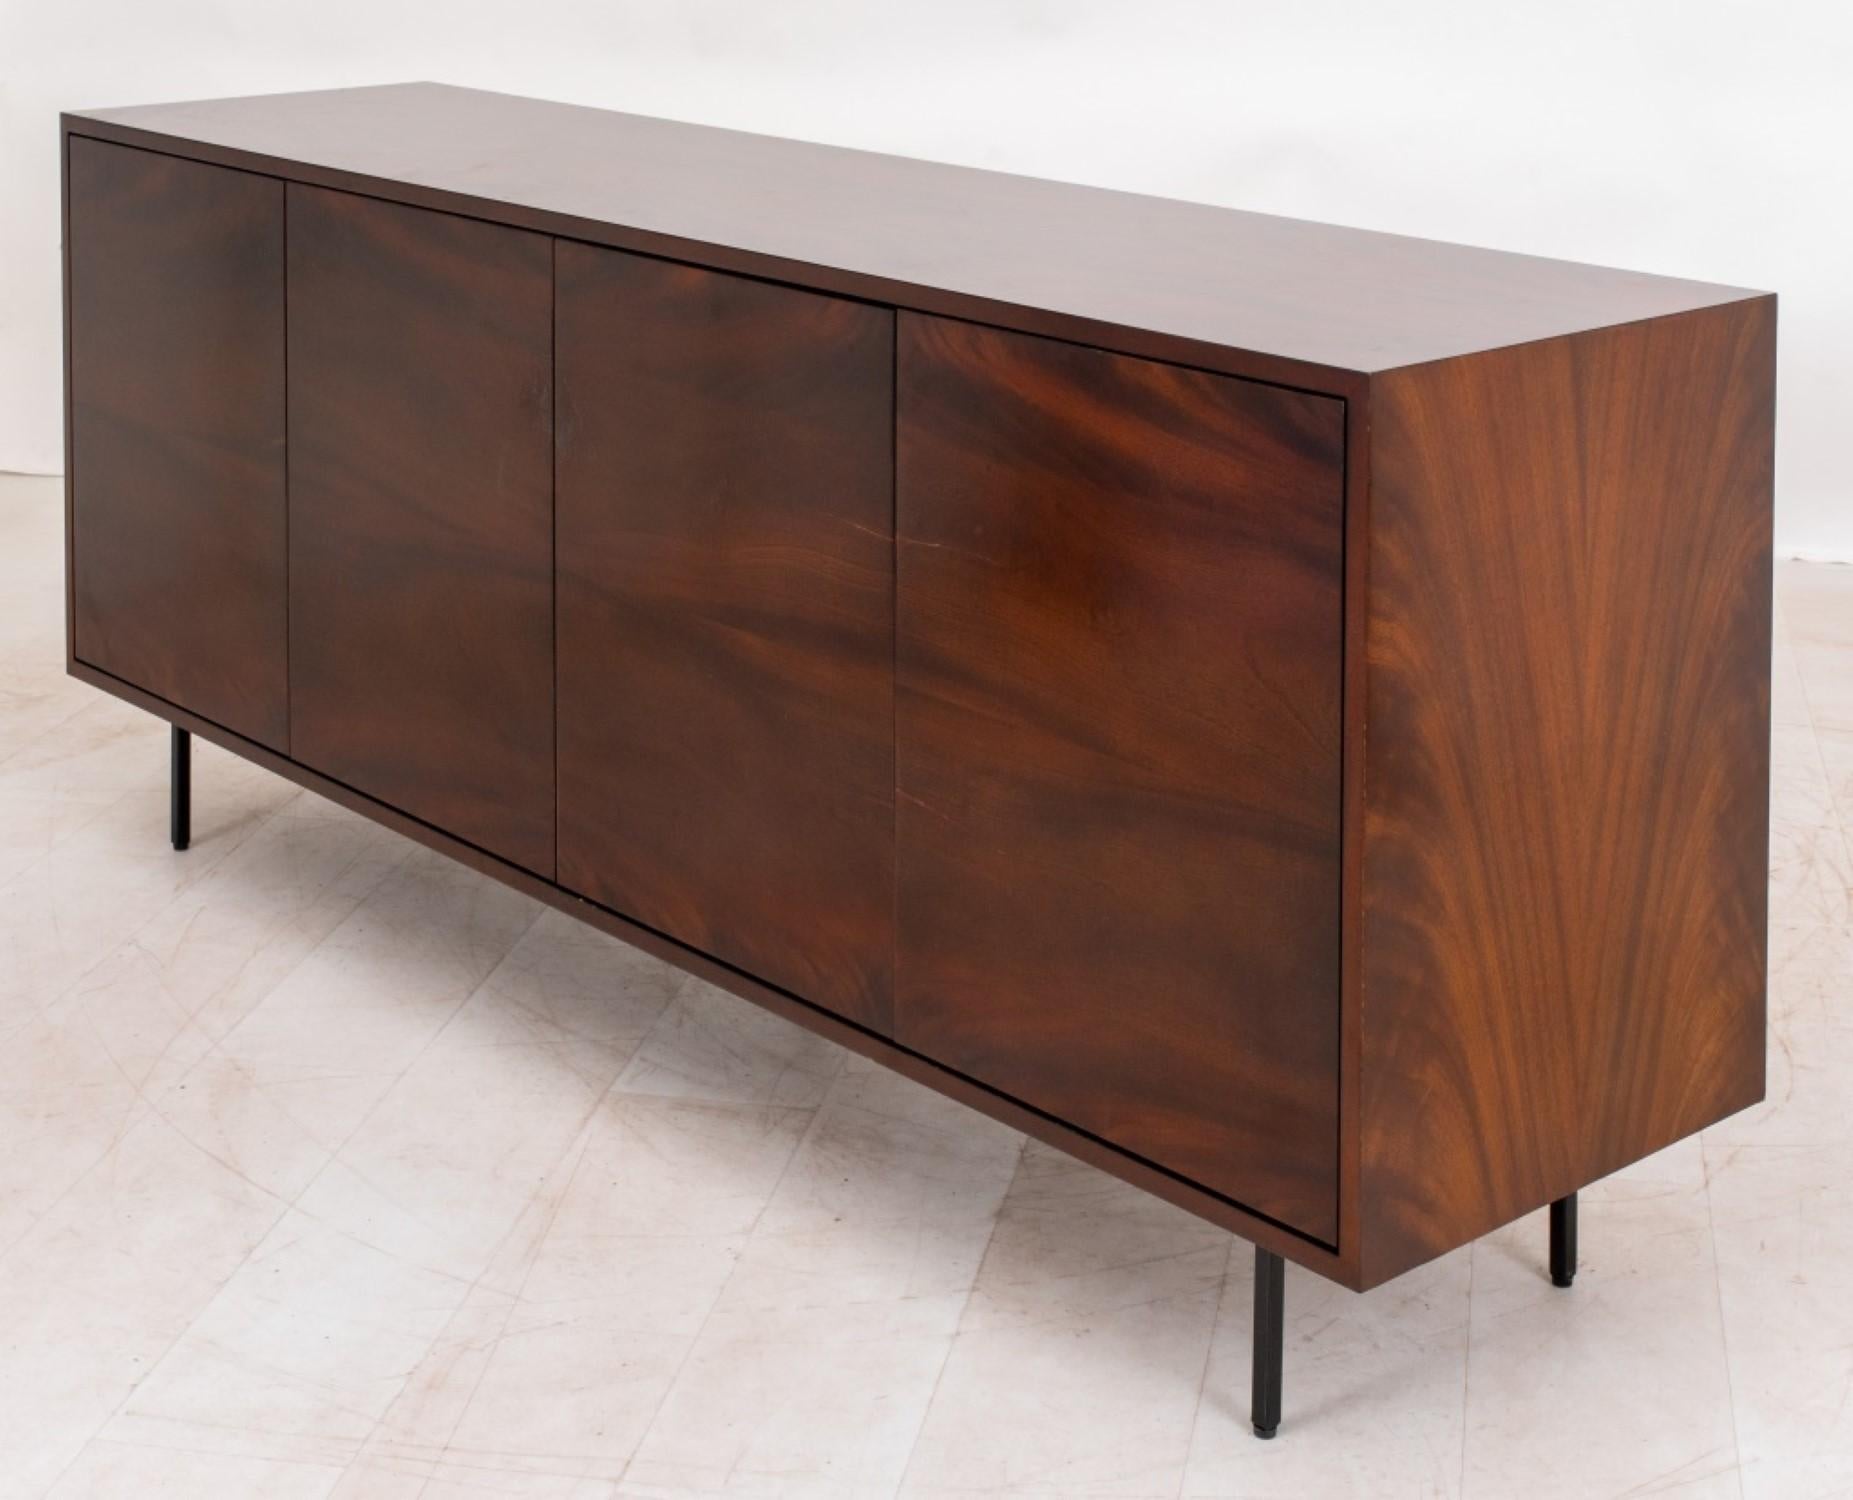 
The Herman Miller Style credenza sideboard cabinet measures approximately 30 inches in height, 71 inches in width, and 18 inches in depth.




